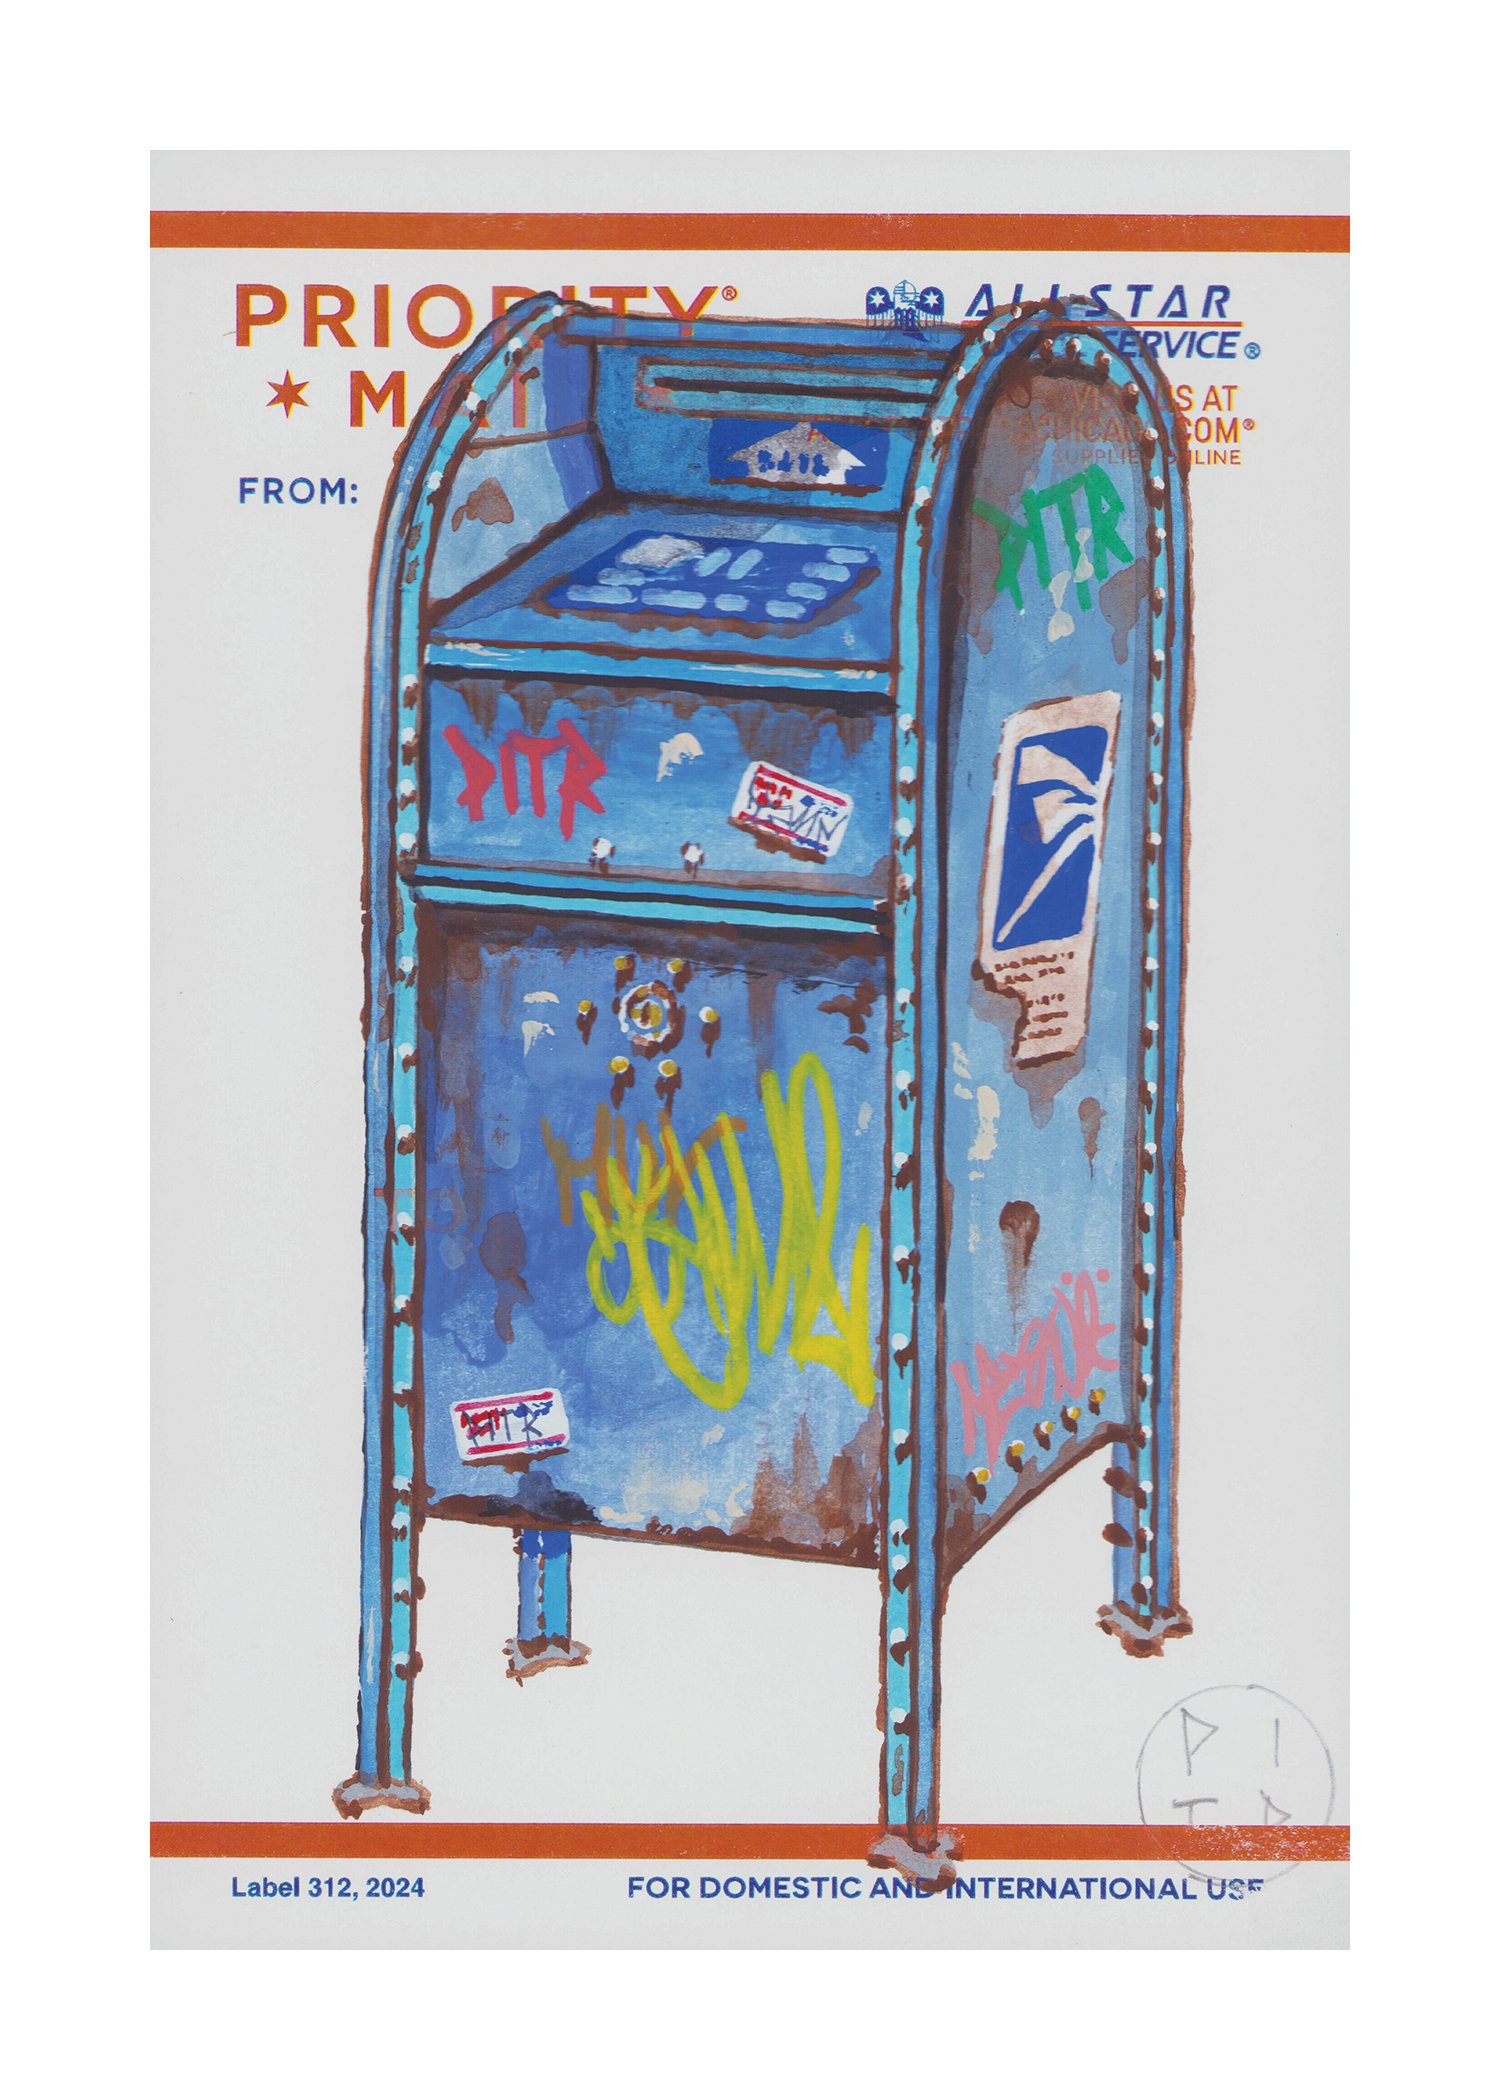 148. Post Box by Pizza in the Rain